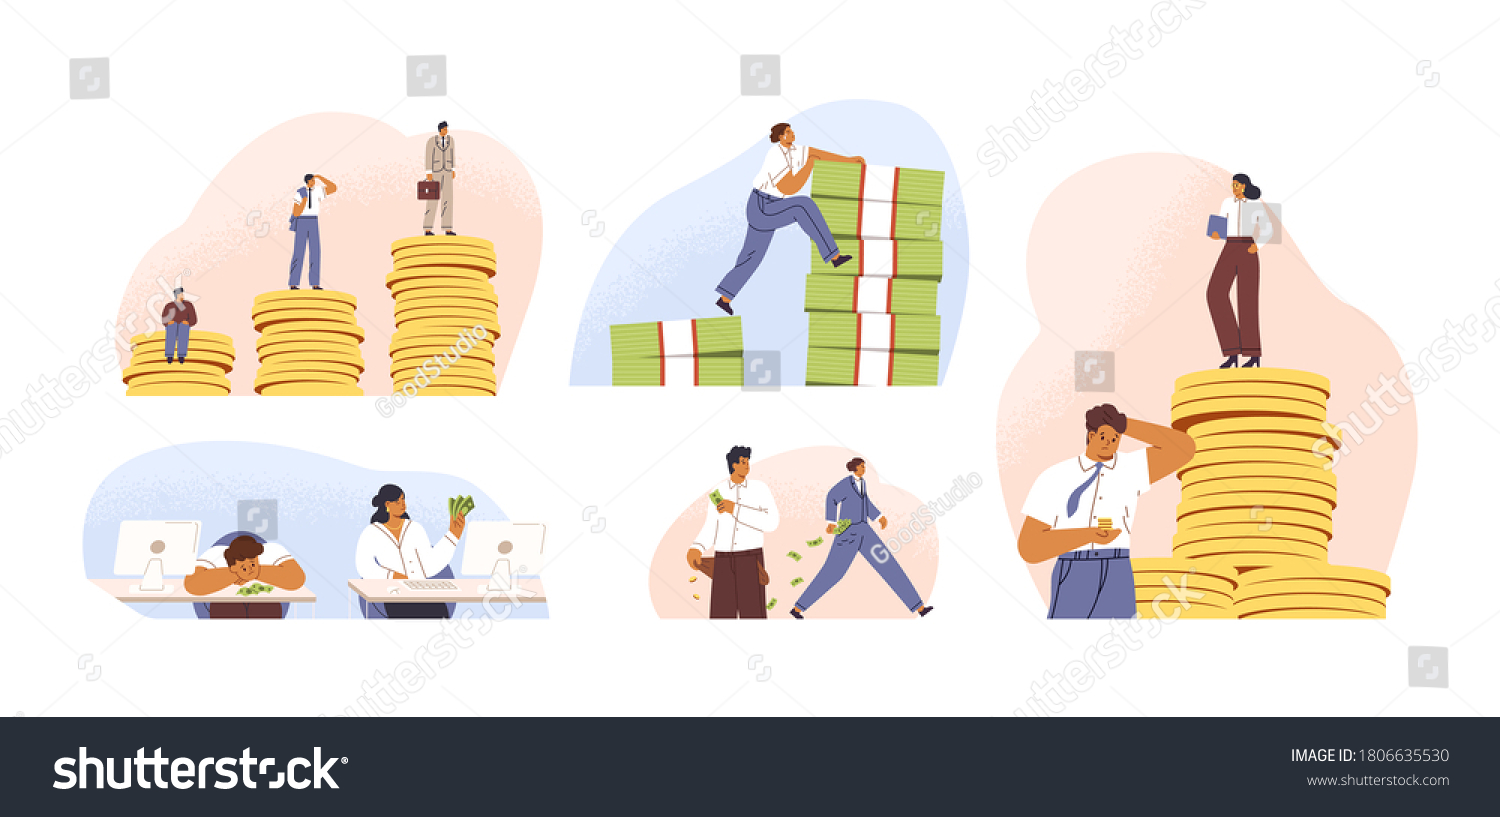 Set of rich and poor people with different salary, income or career growth unfair opportunity. Concept of financial inequality or gap in earning. Flat vector cartoon illustration isolated on white #1806635530